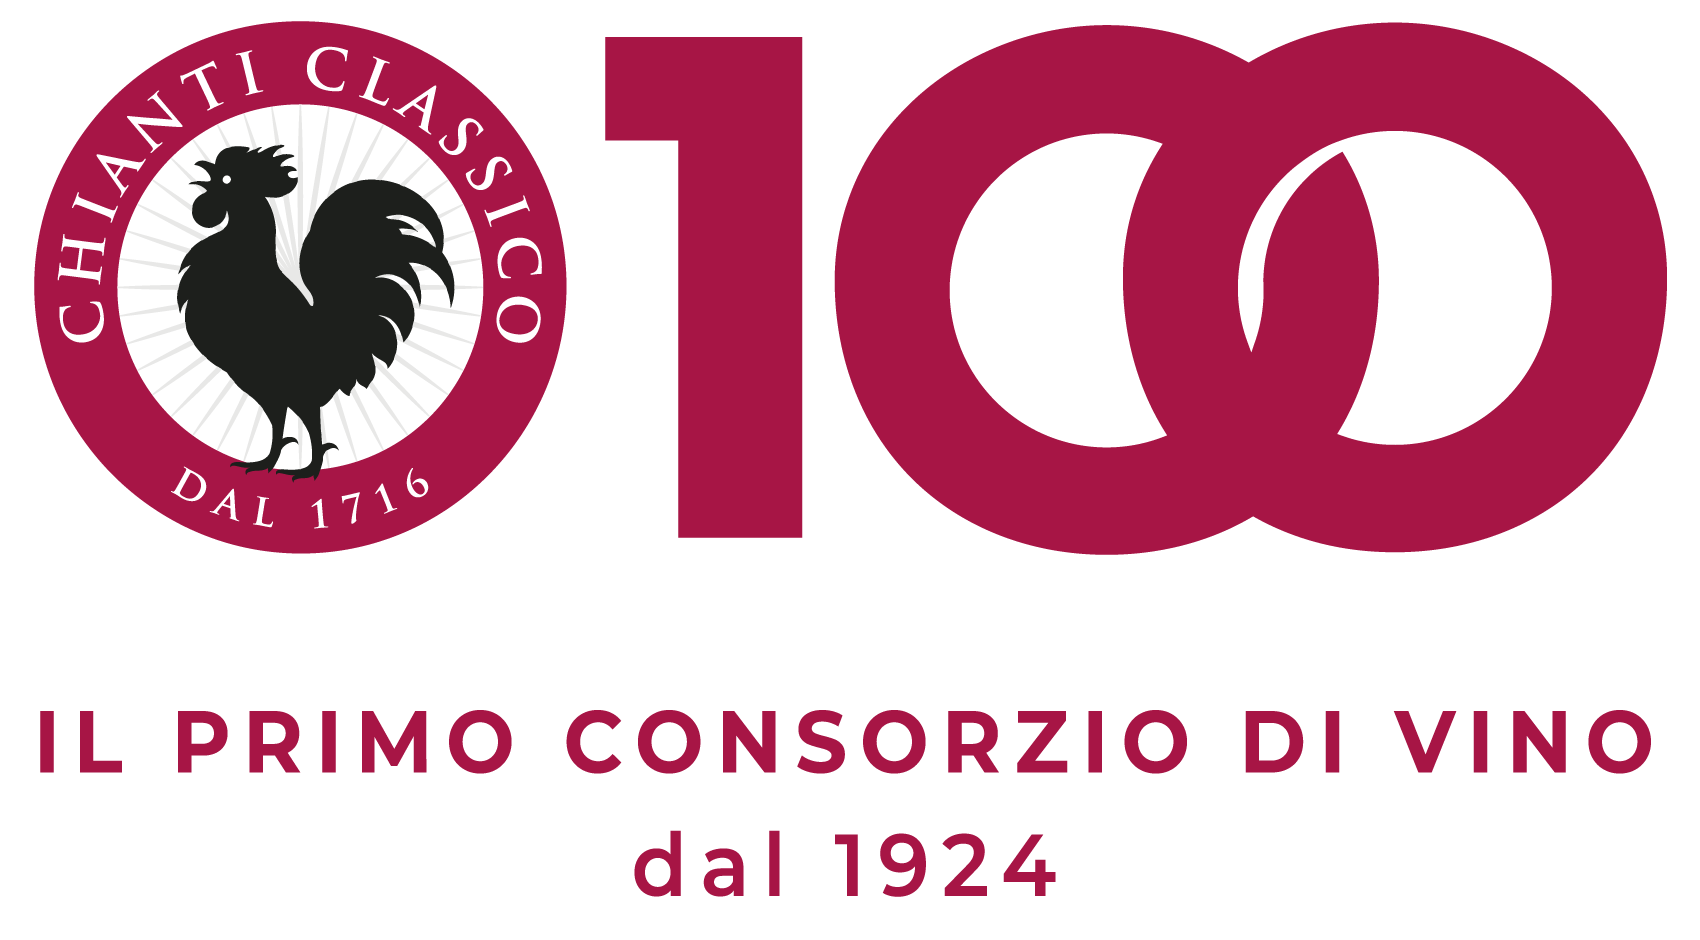 Special prize offered by the Chianti Classico Consortium for the 100th finisher of the 47.2 km race